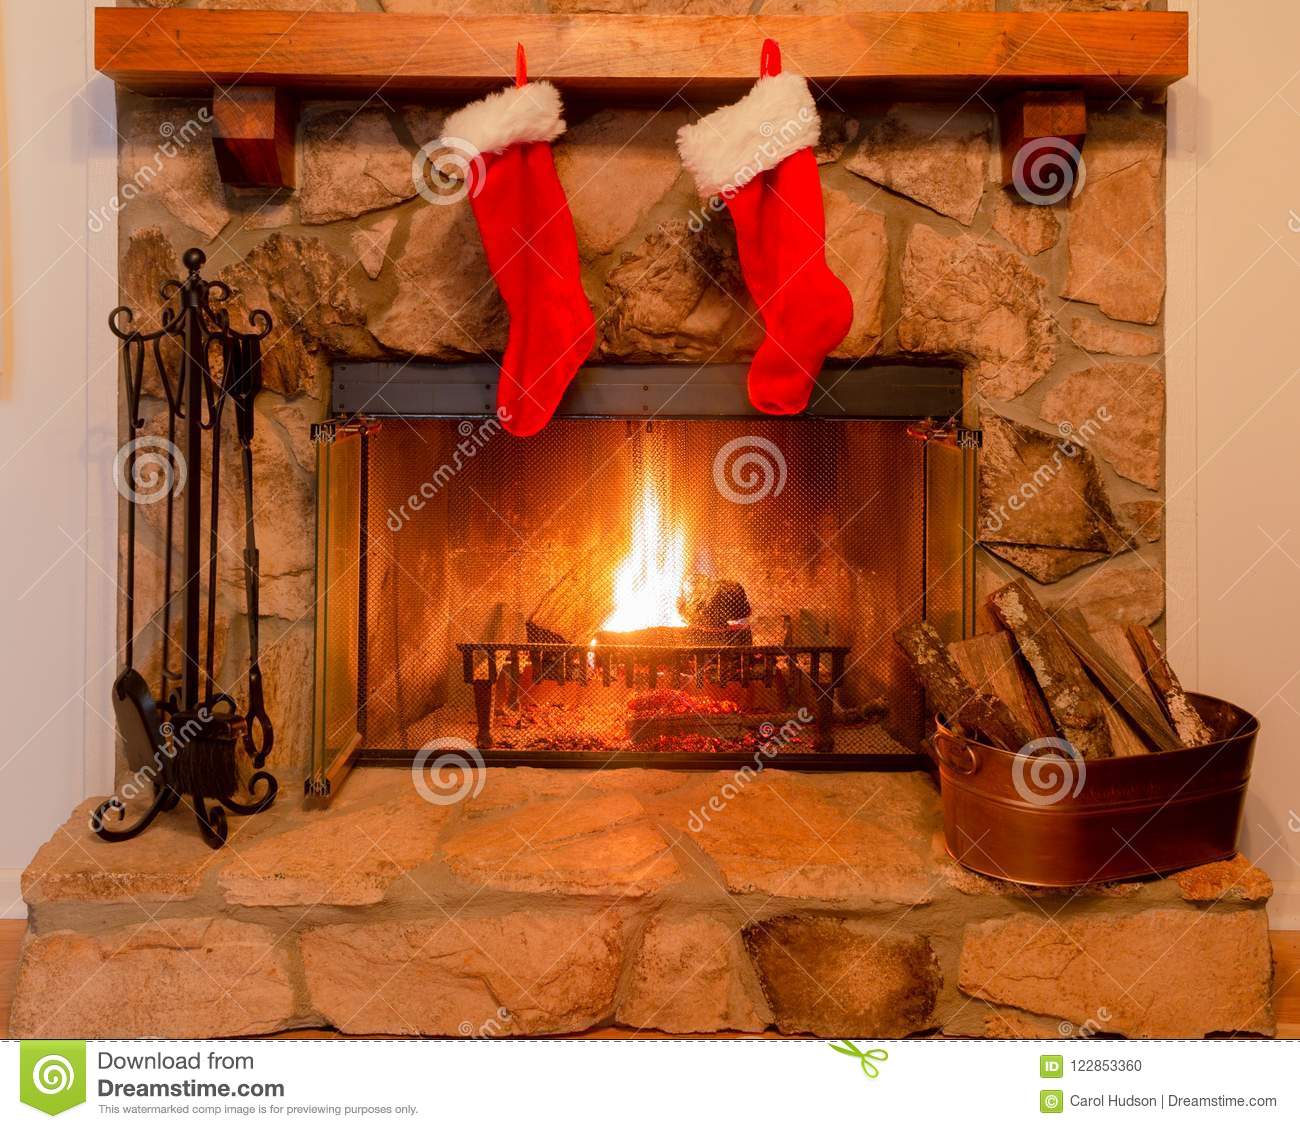 Stone Fireplace with Wood Mantel Inspirational Two Christmas Stockings the Mantle A Stone Fireplace